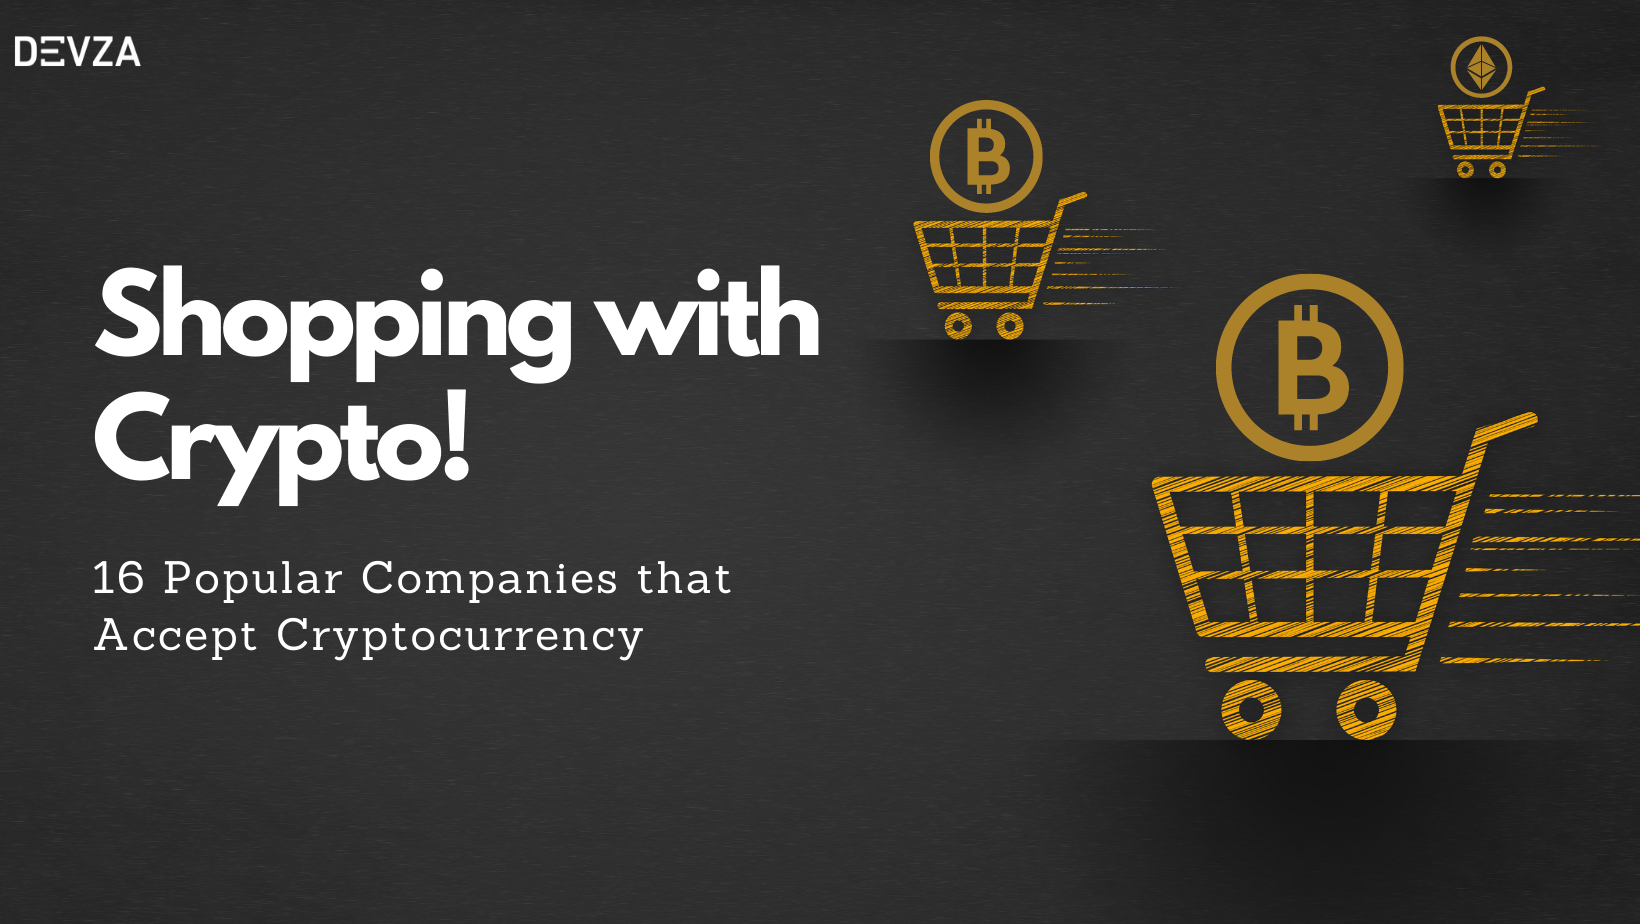 companies that accept cryptocurrency 2018